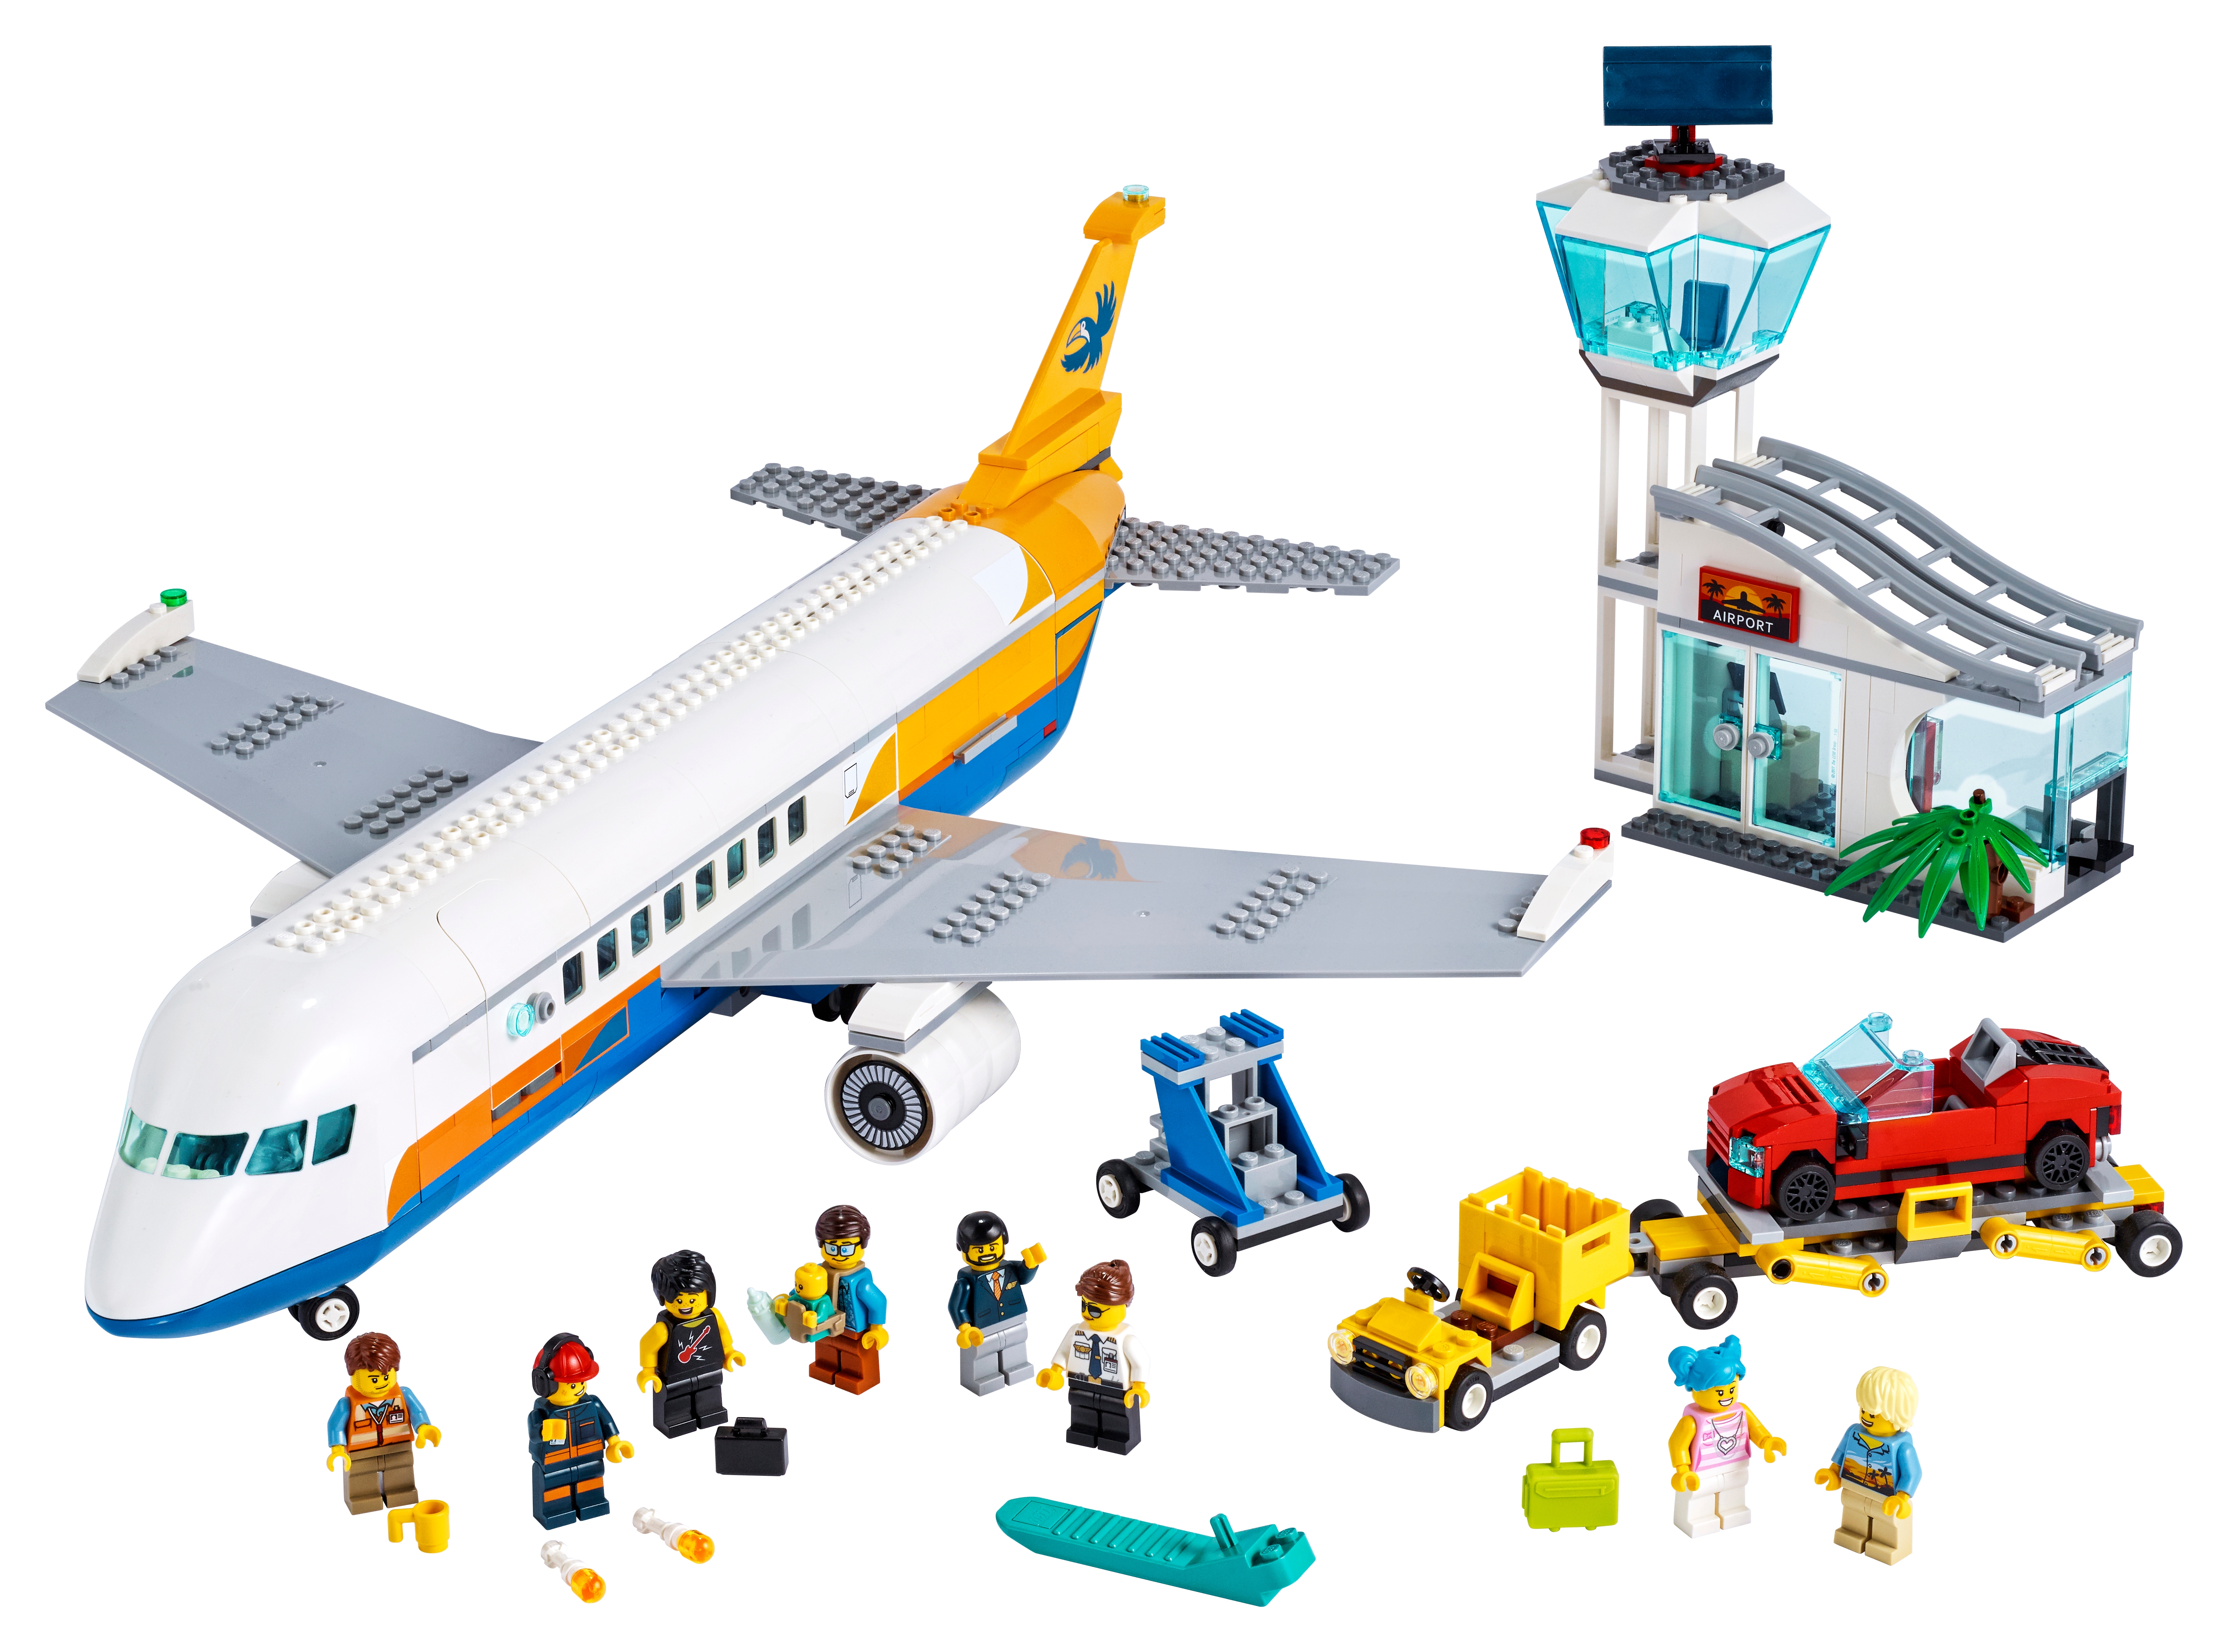 Lego Duplo MIDSIZE YELLOW AIRPLANE for AIRPORT Complete with Wheels Passenger